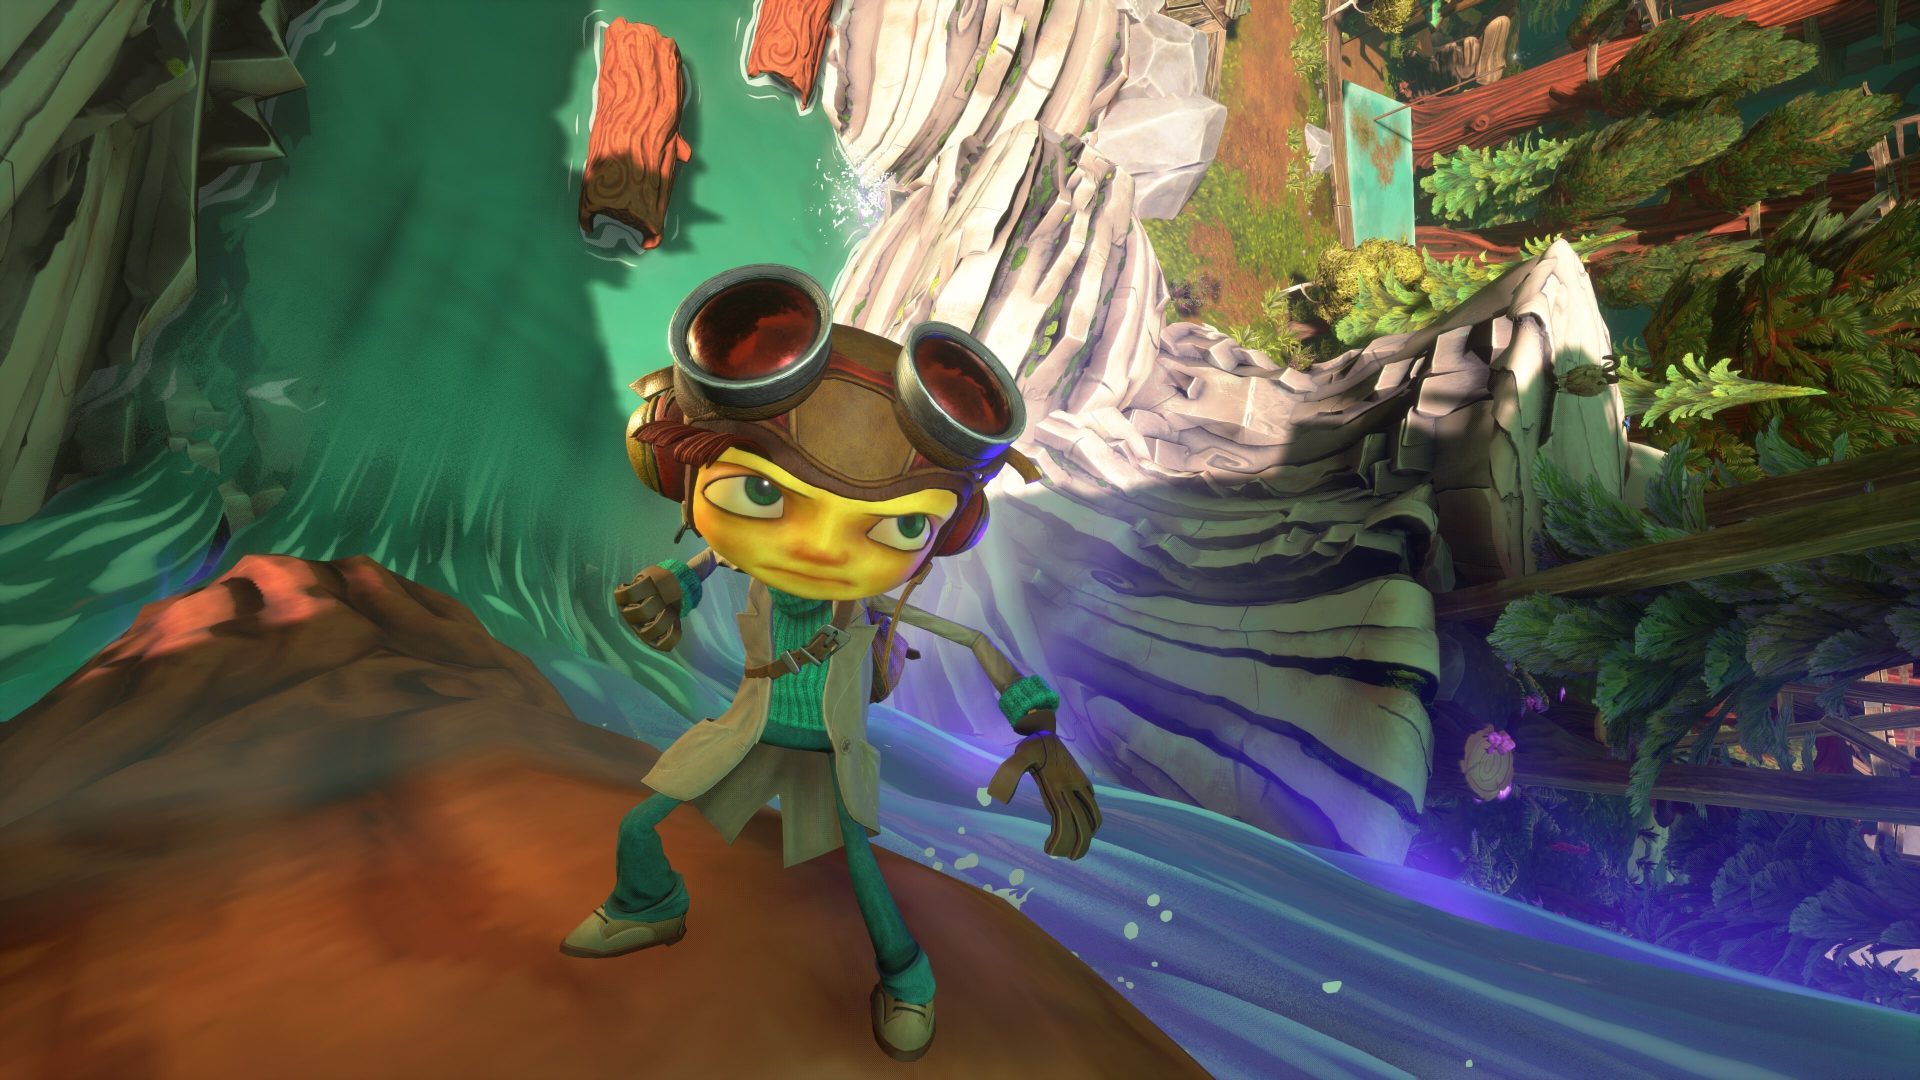 How Psychonauts 2 nearly lower indubitably one of its most valuable aspects